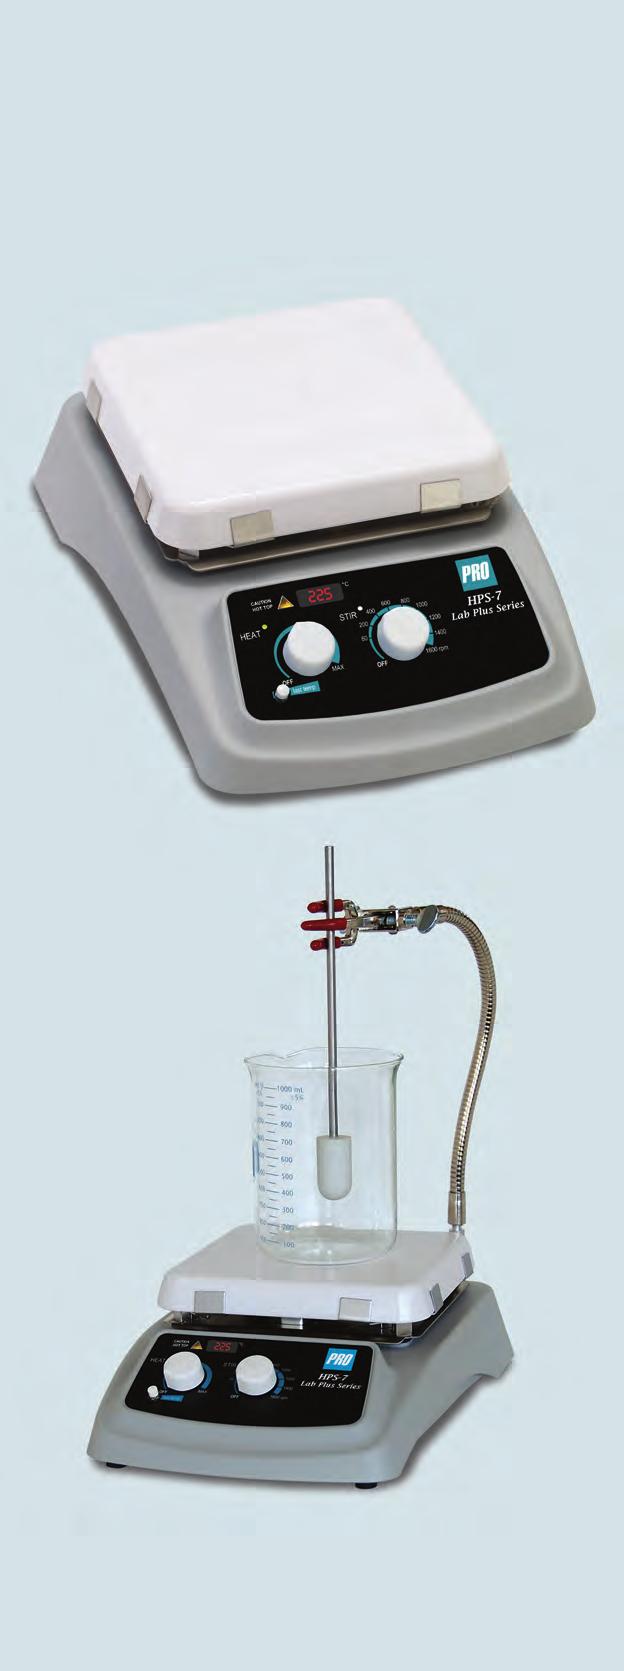 Lab Plus Series from PRO Scientific HPS-7 Hotplate Stirrer PRO s HPS-7 hotplate stirrer delivers accurate, repeatable results.